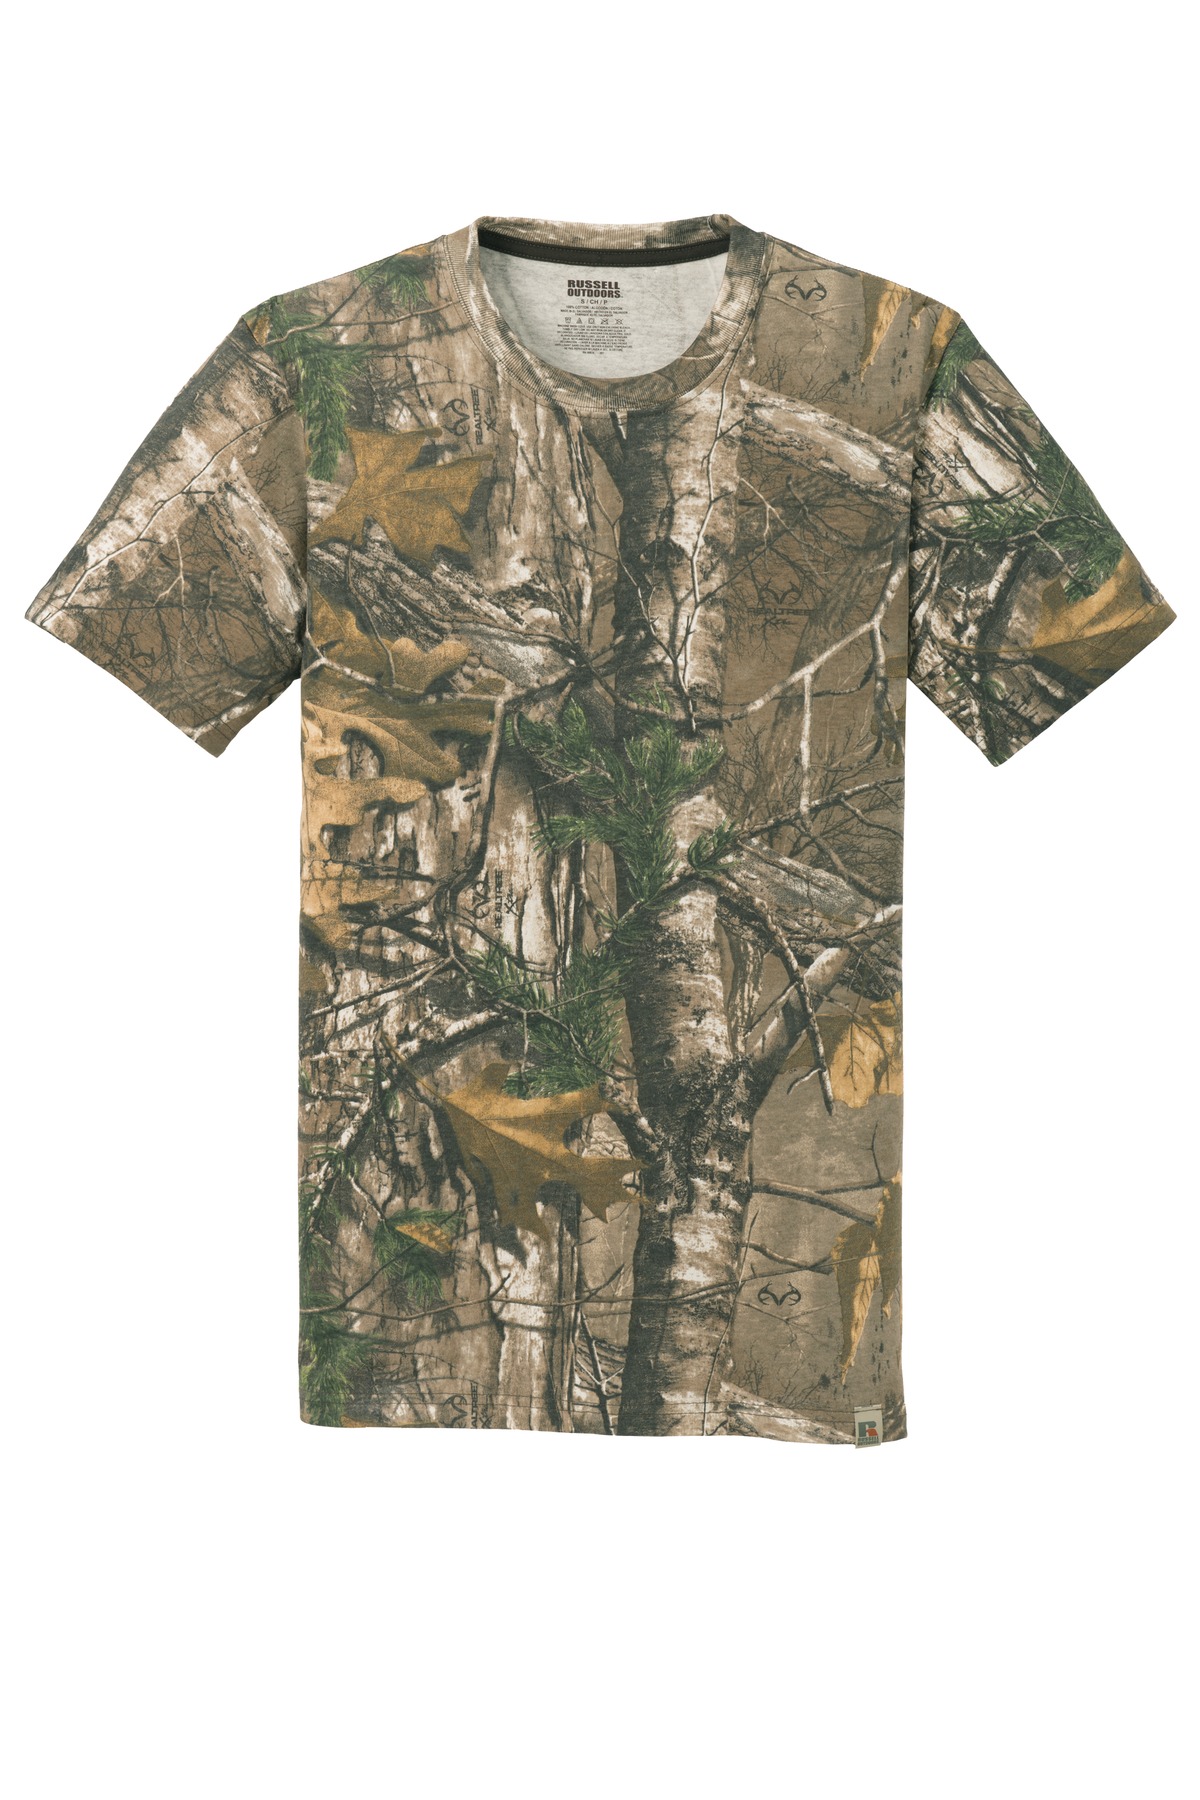 Russell Outdoors ™ - Realtree ® Explorer 100% Cotton T-Shirt. NP0021R ...